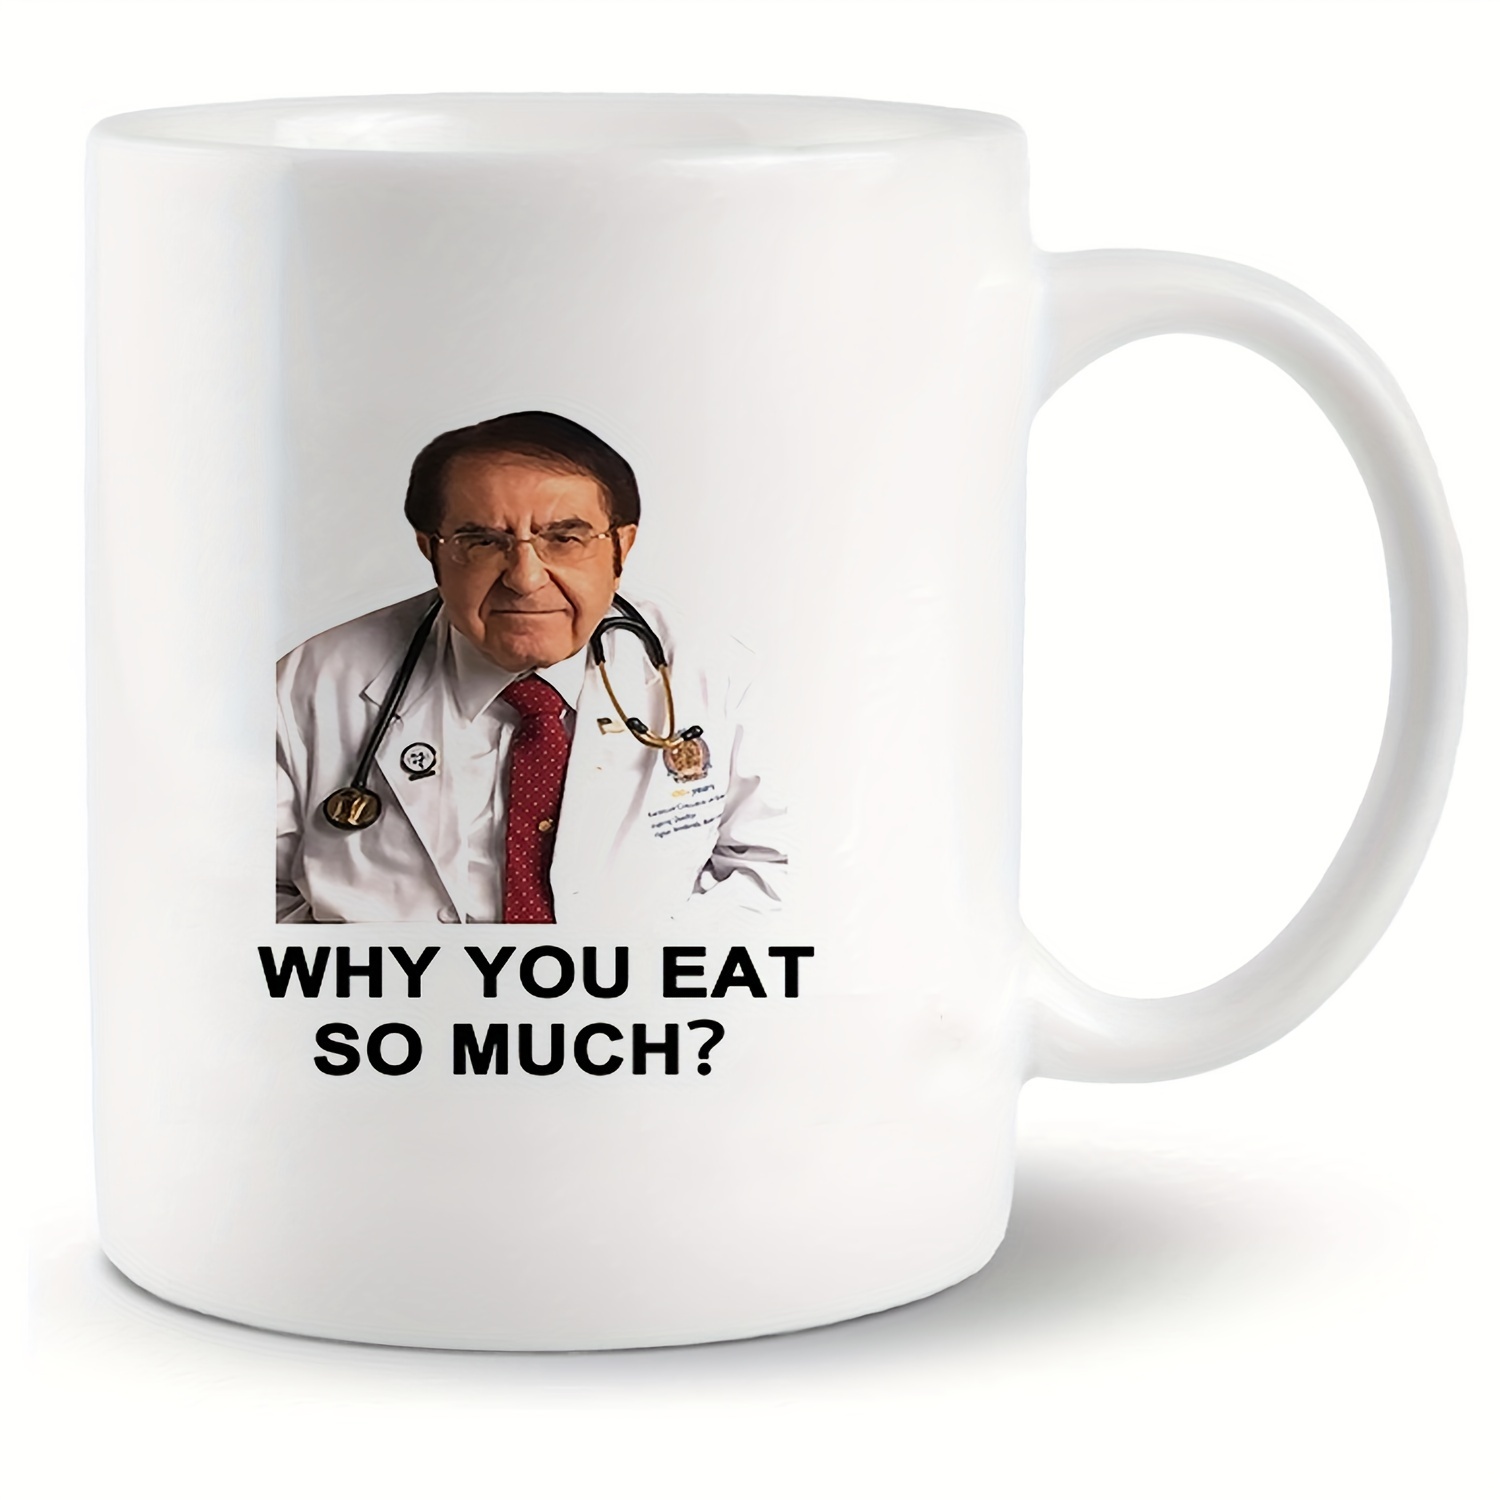 

1pc, Funny Doctor Coffee Mug, Ceramic Coffee Cups, Why You Eat So Much Water Cups, Summer Winter Drinkware, Birthday Gifts, Holiday Gifts, New Year Gifts, Valentine's Day Gifts